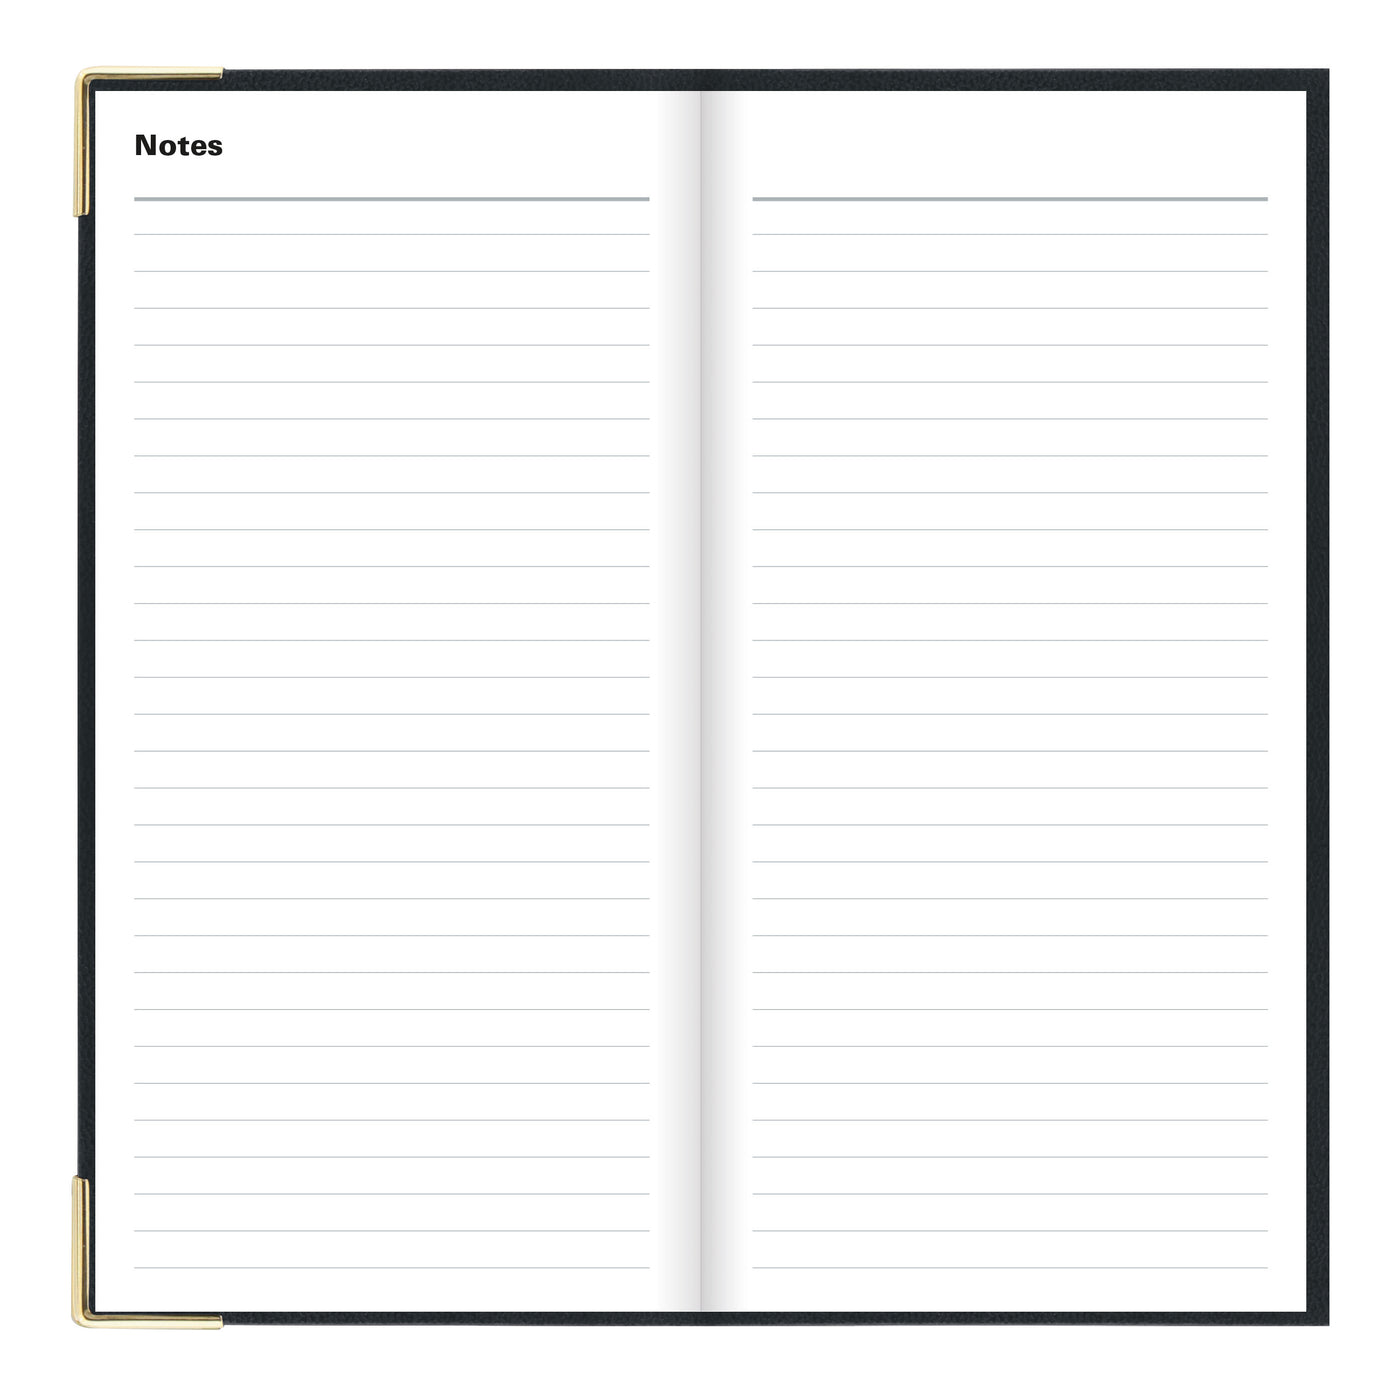 Letts Classic Week to View Vertical Planner - 6 5/8" x 3 1/4" - Black